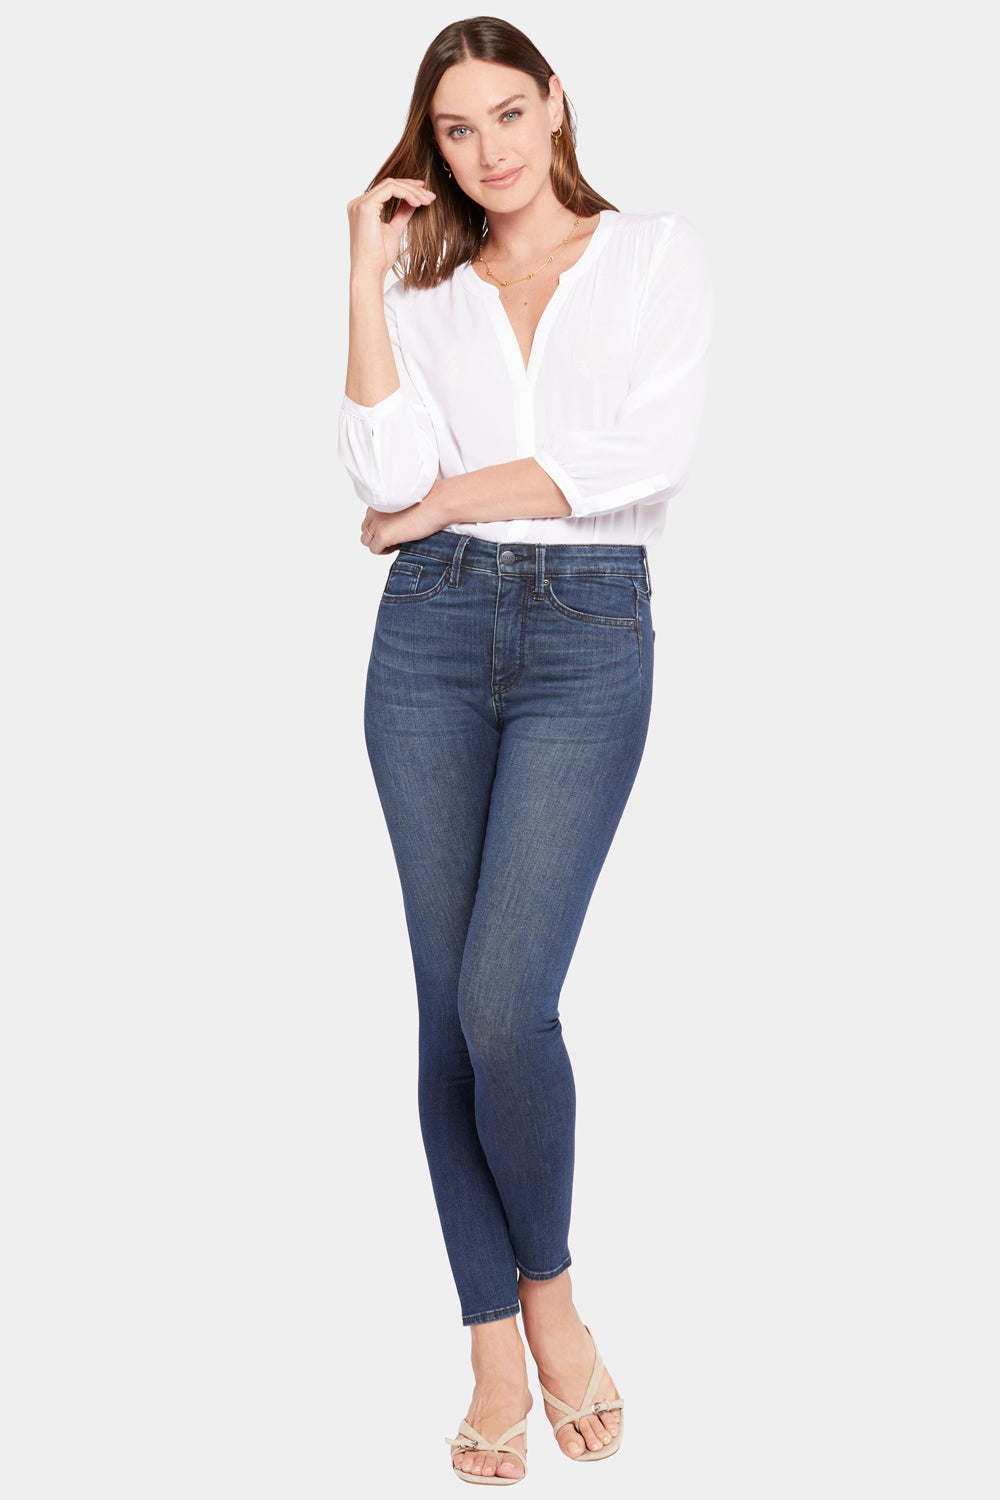 NYDJ Le Silhouette Ami Skinny Jeans With High Rise - Precious